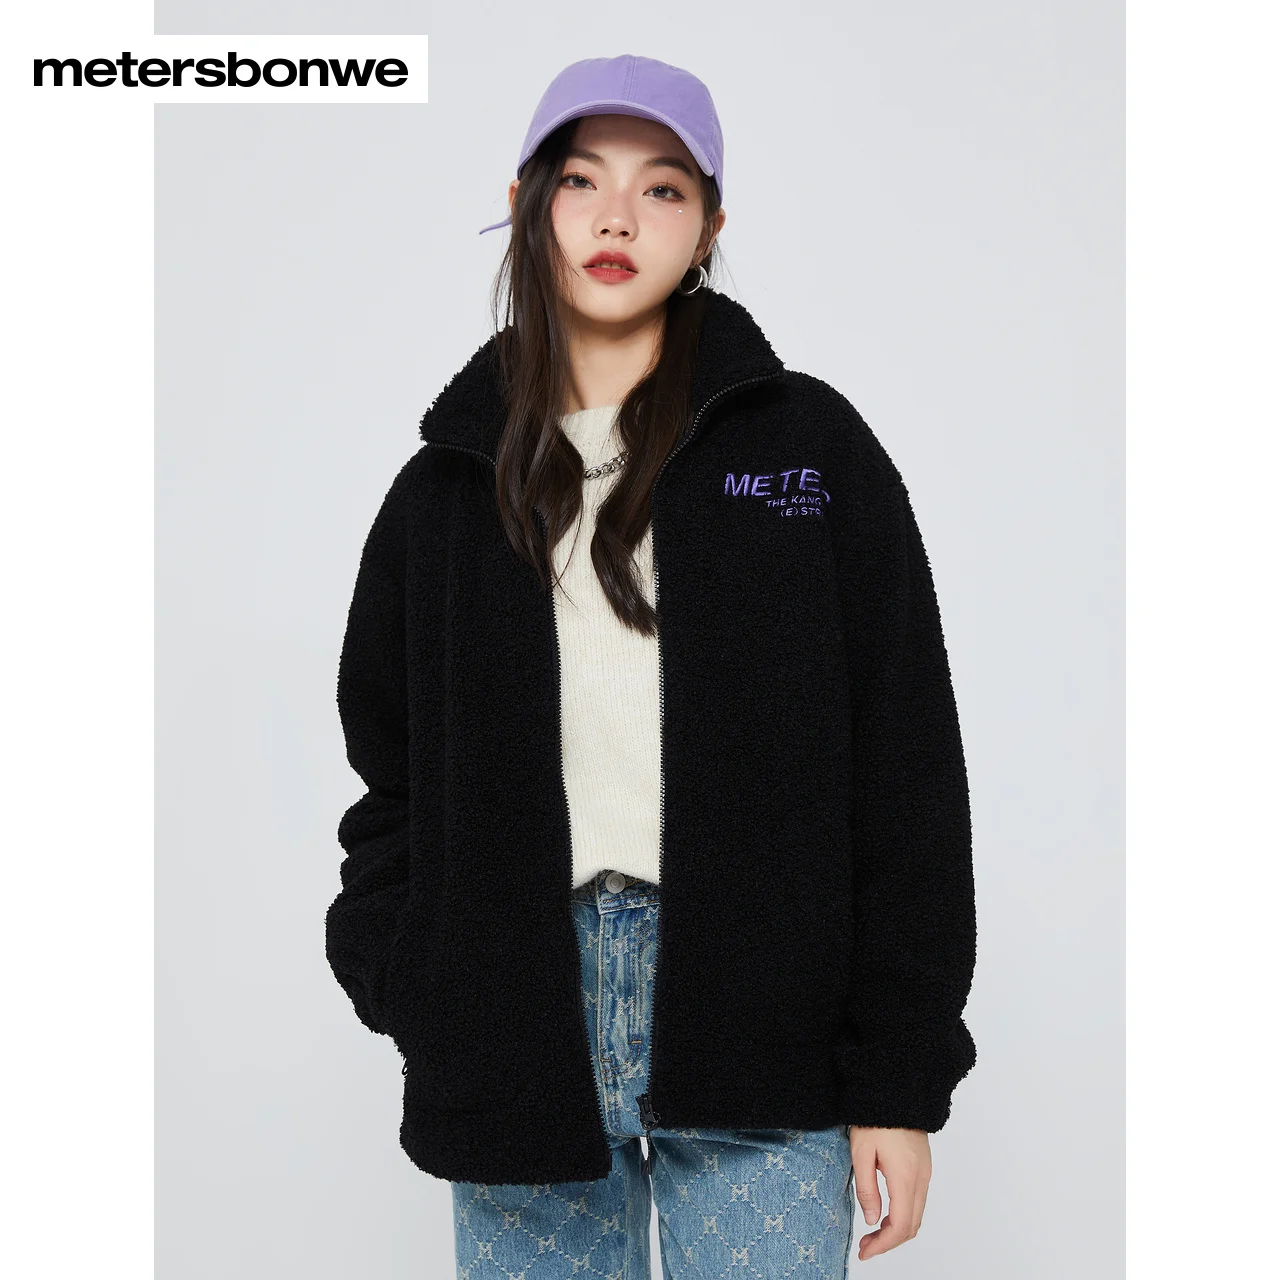 Metersbonwe 22 New Winter Women's Bright Velvet Stand Collar Jackets Solid Color Loose Warm Wear Fashion Trend Autumn Outwear